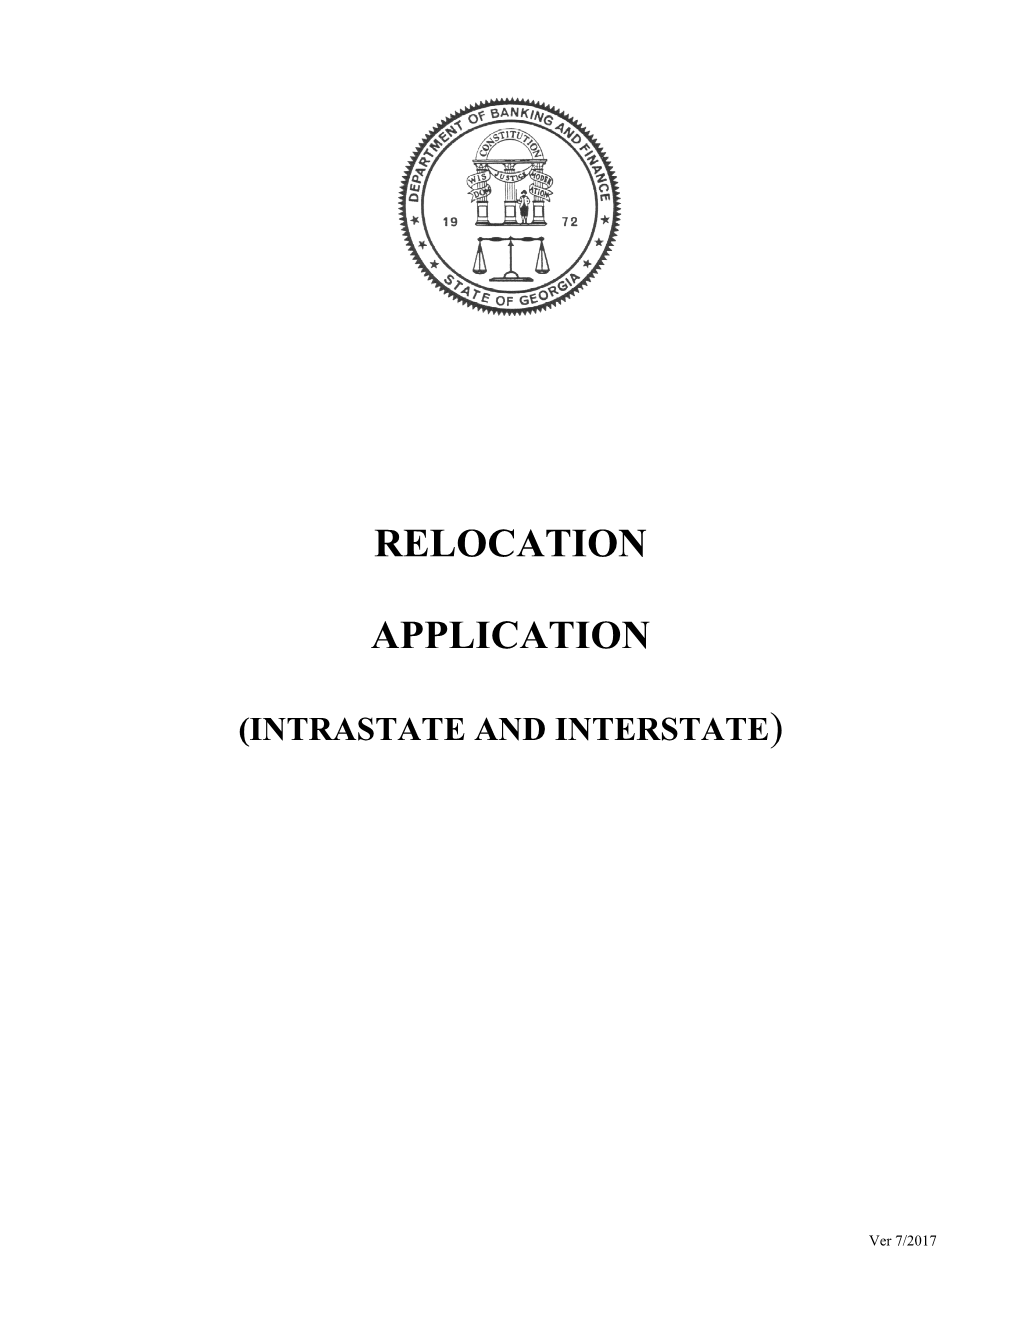 Instructions for Relocation Applications